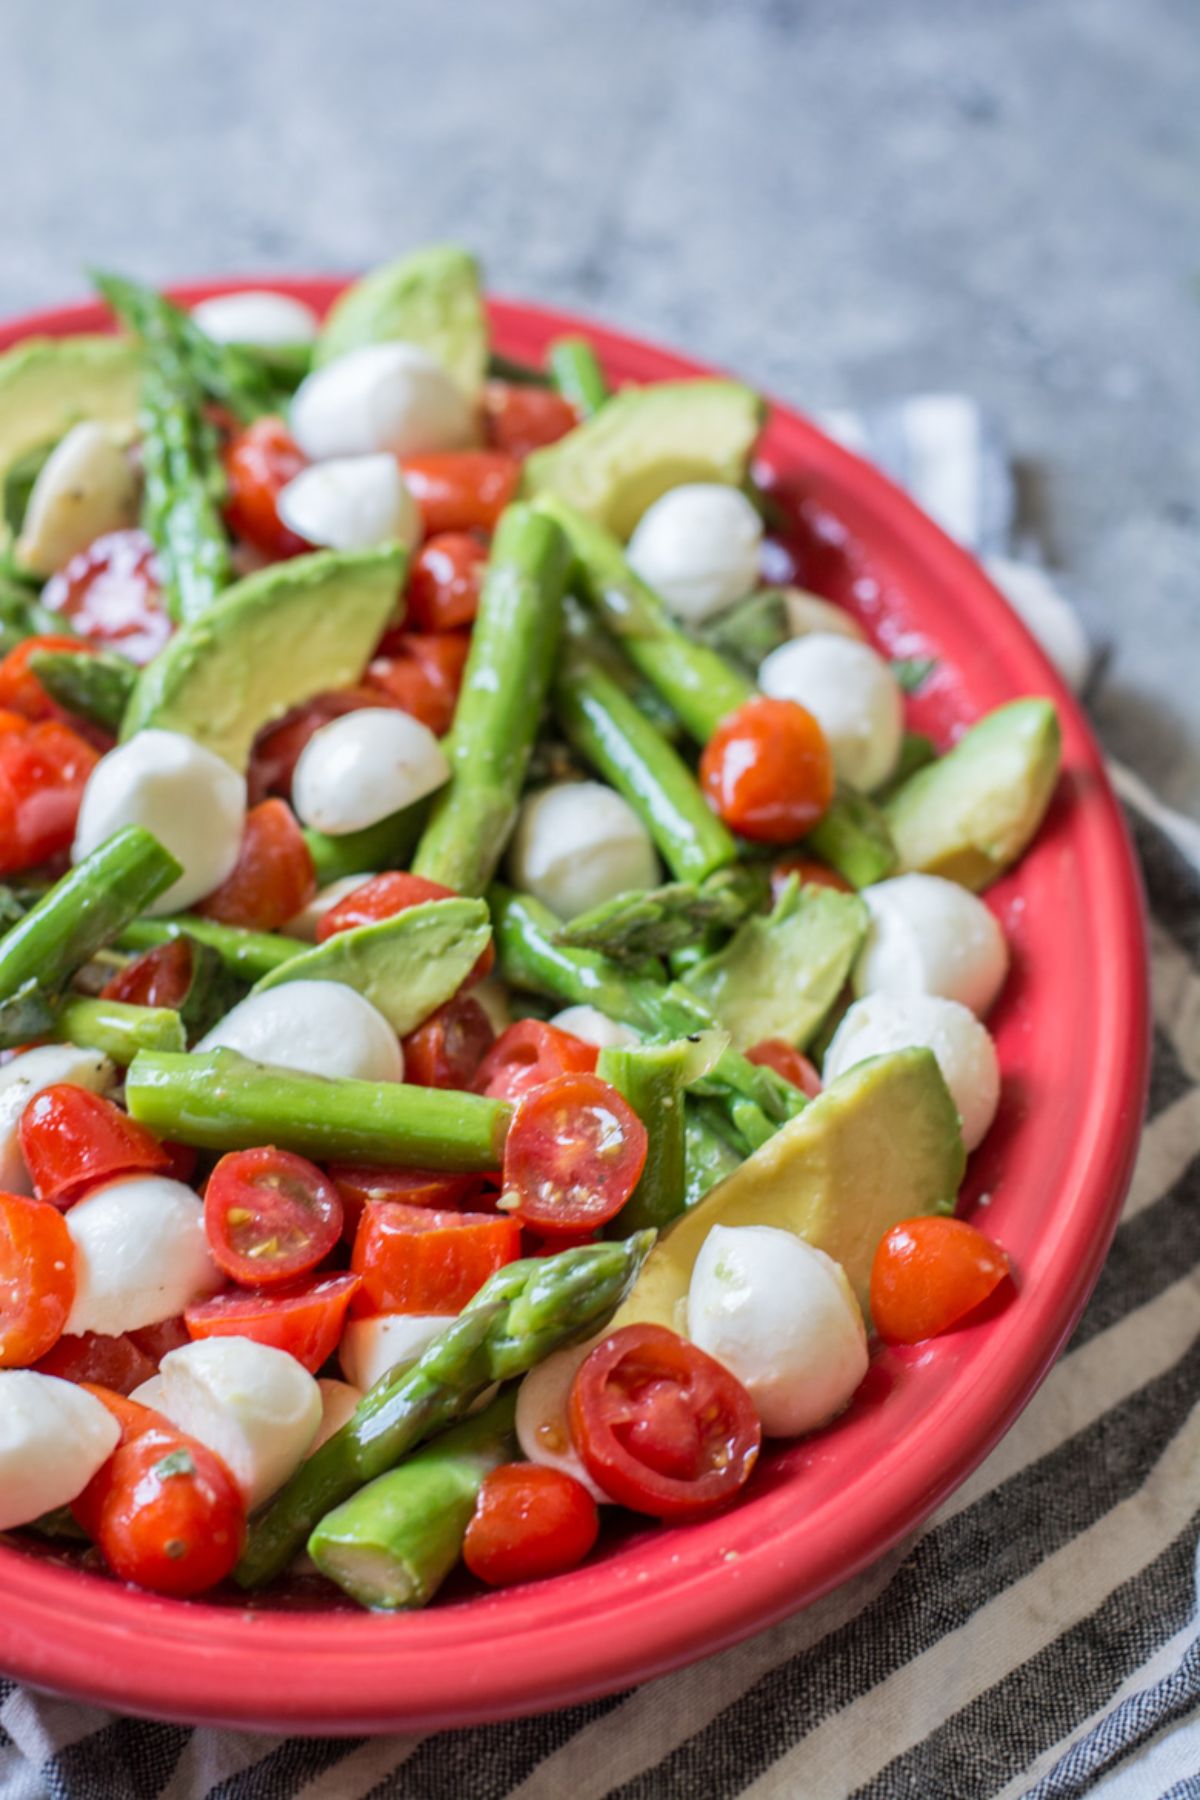 a red bowl sits on a blue and white striped cloth. In it is a salad made of asparagus stems, halved cherry tomatoes, mozzarella balls and avocado